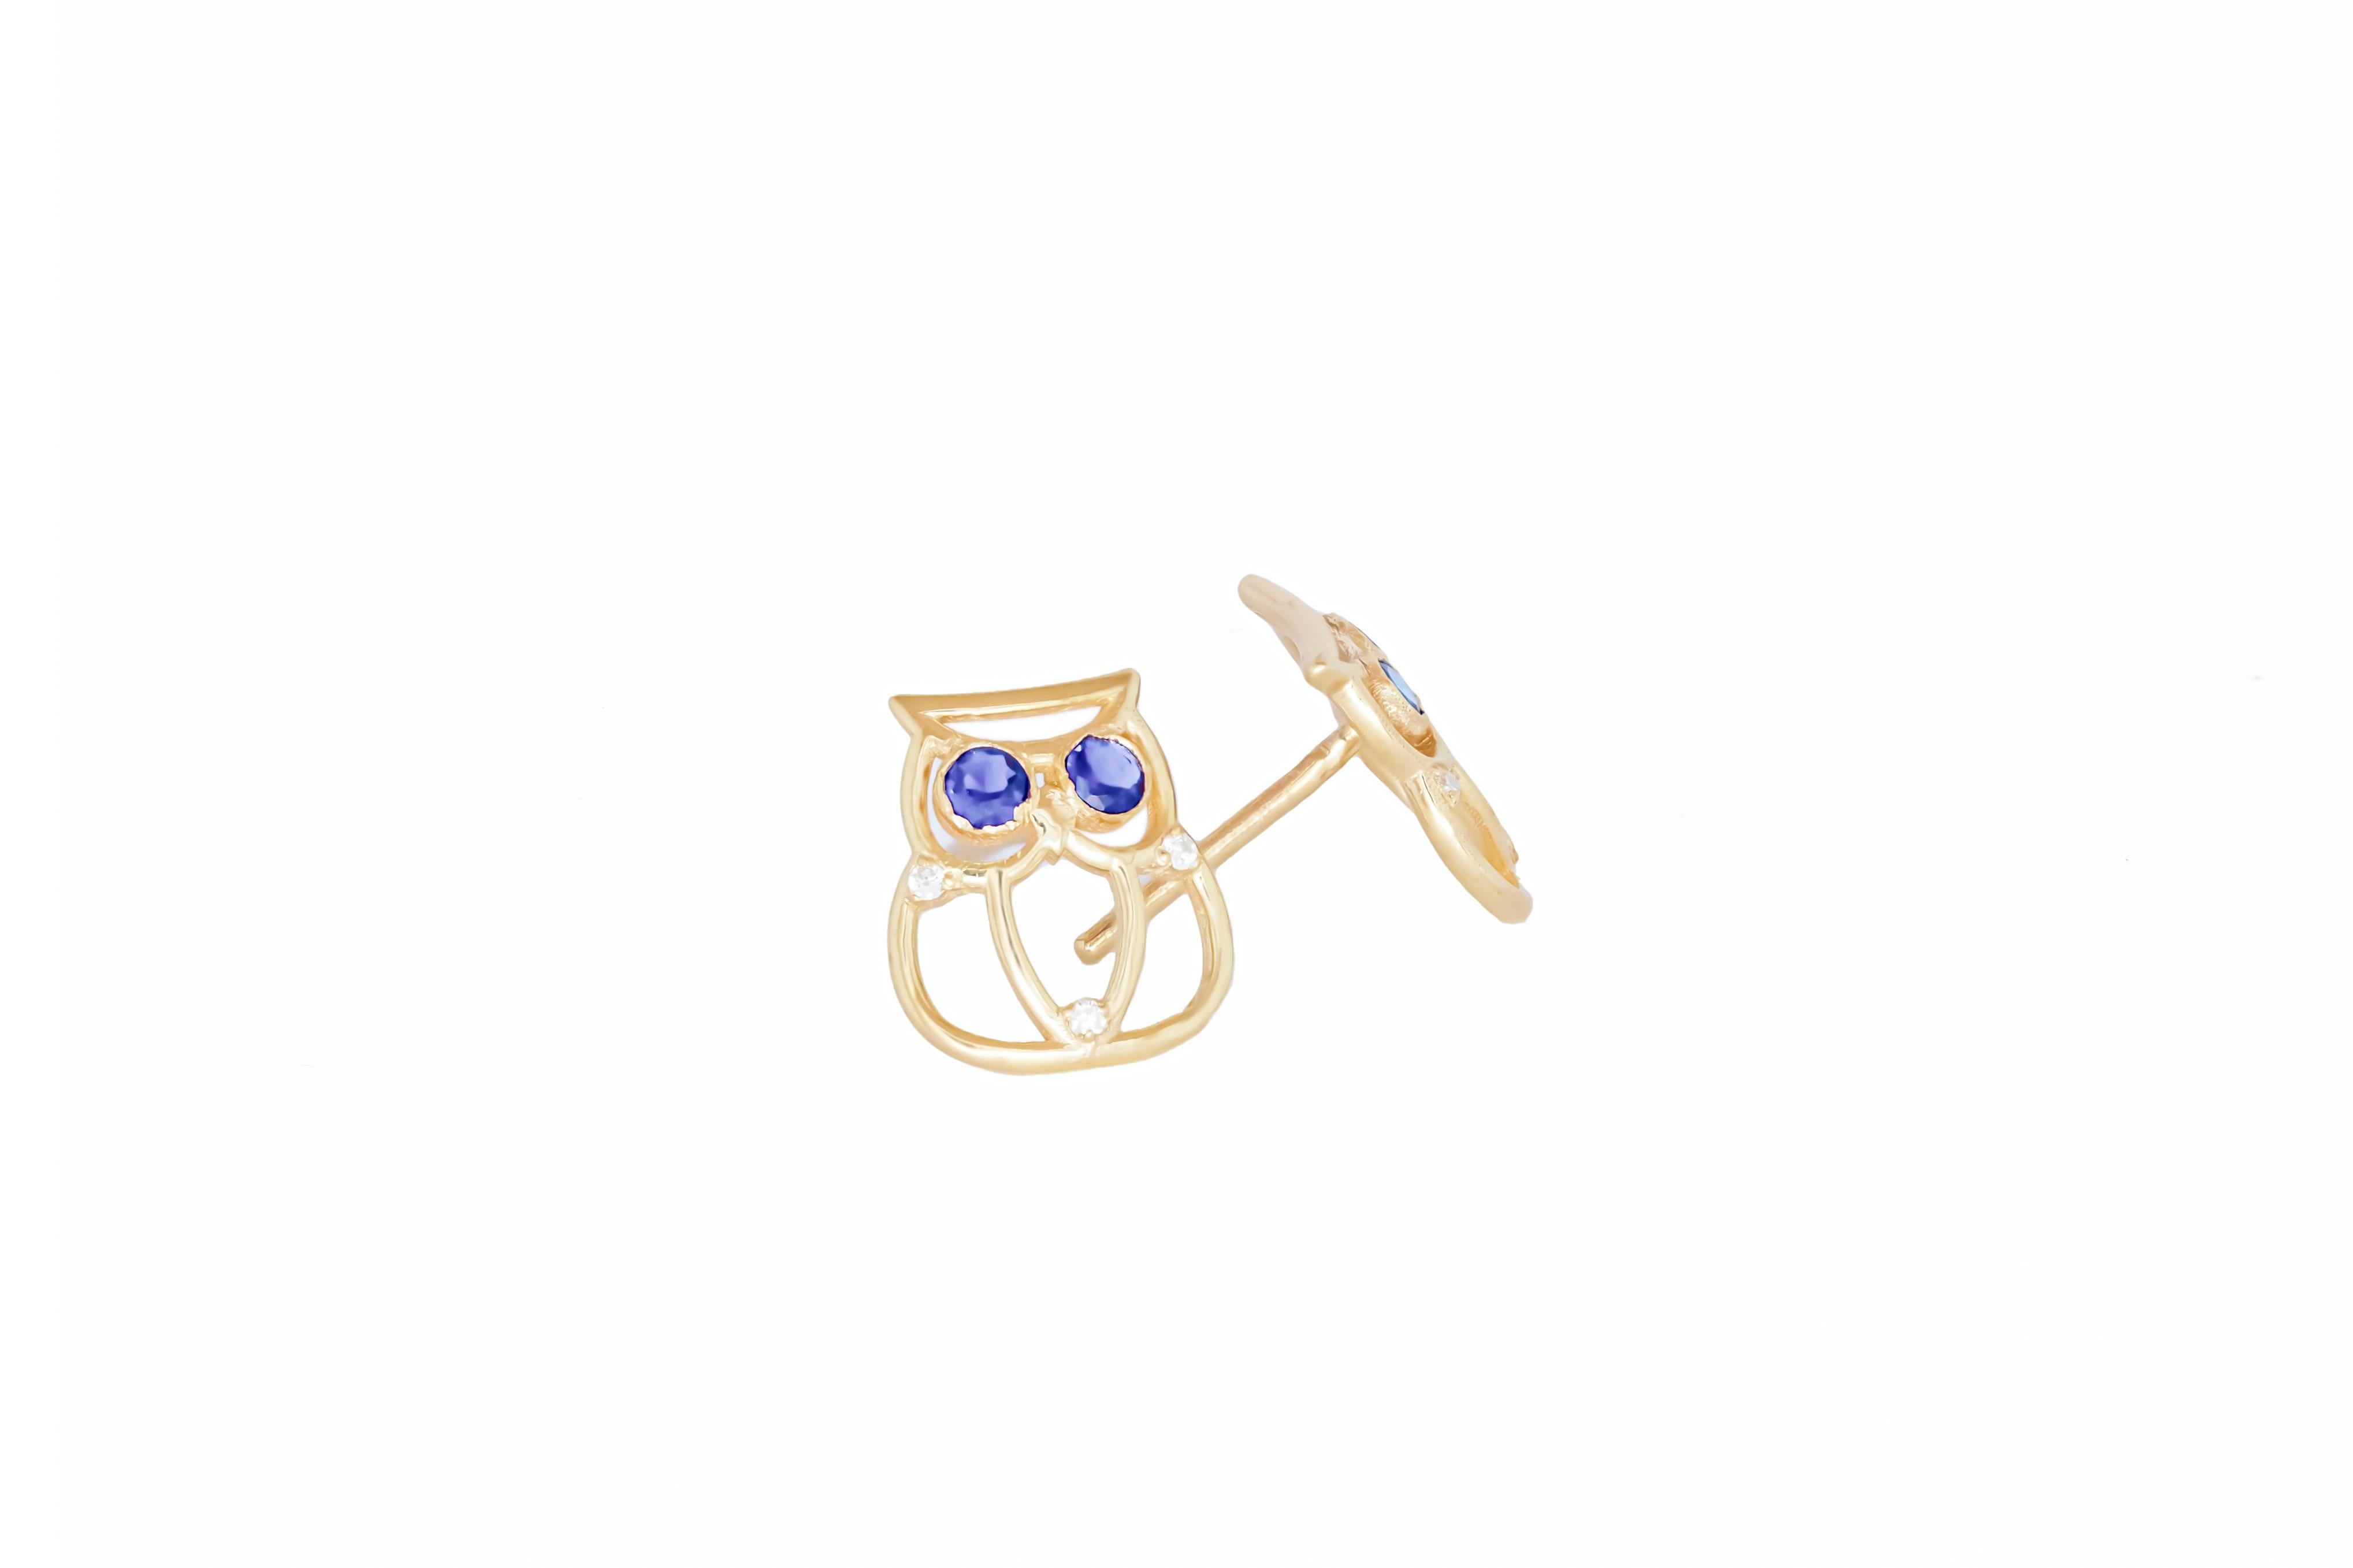 Women's Owl earrings and ring set in 14k gold.  For Sale